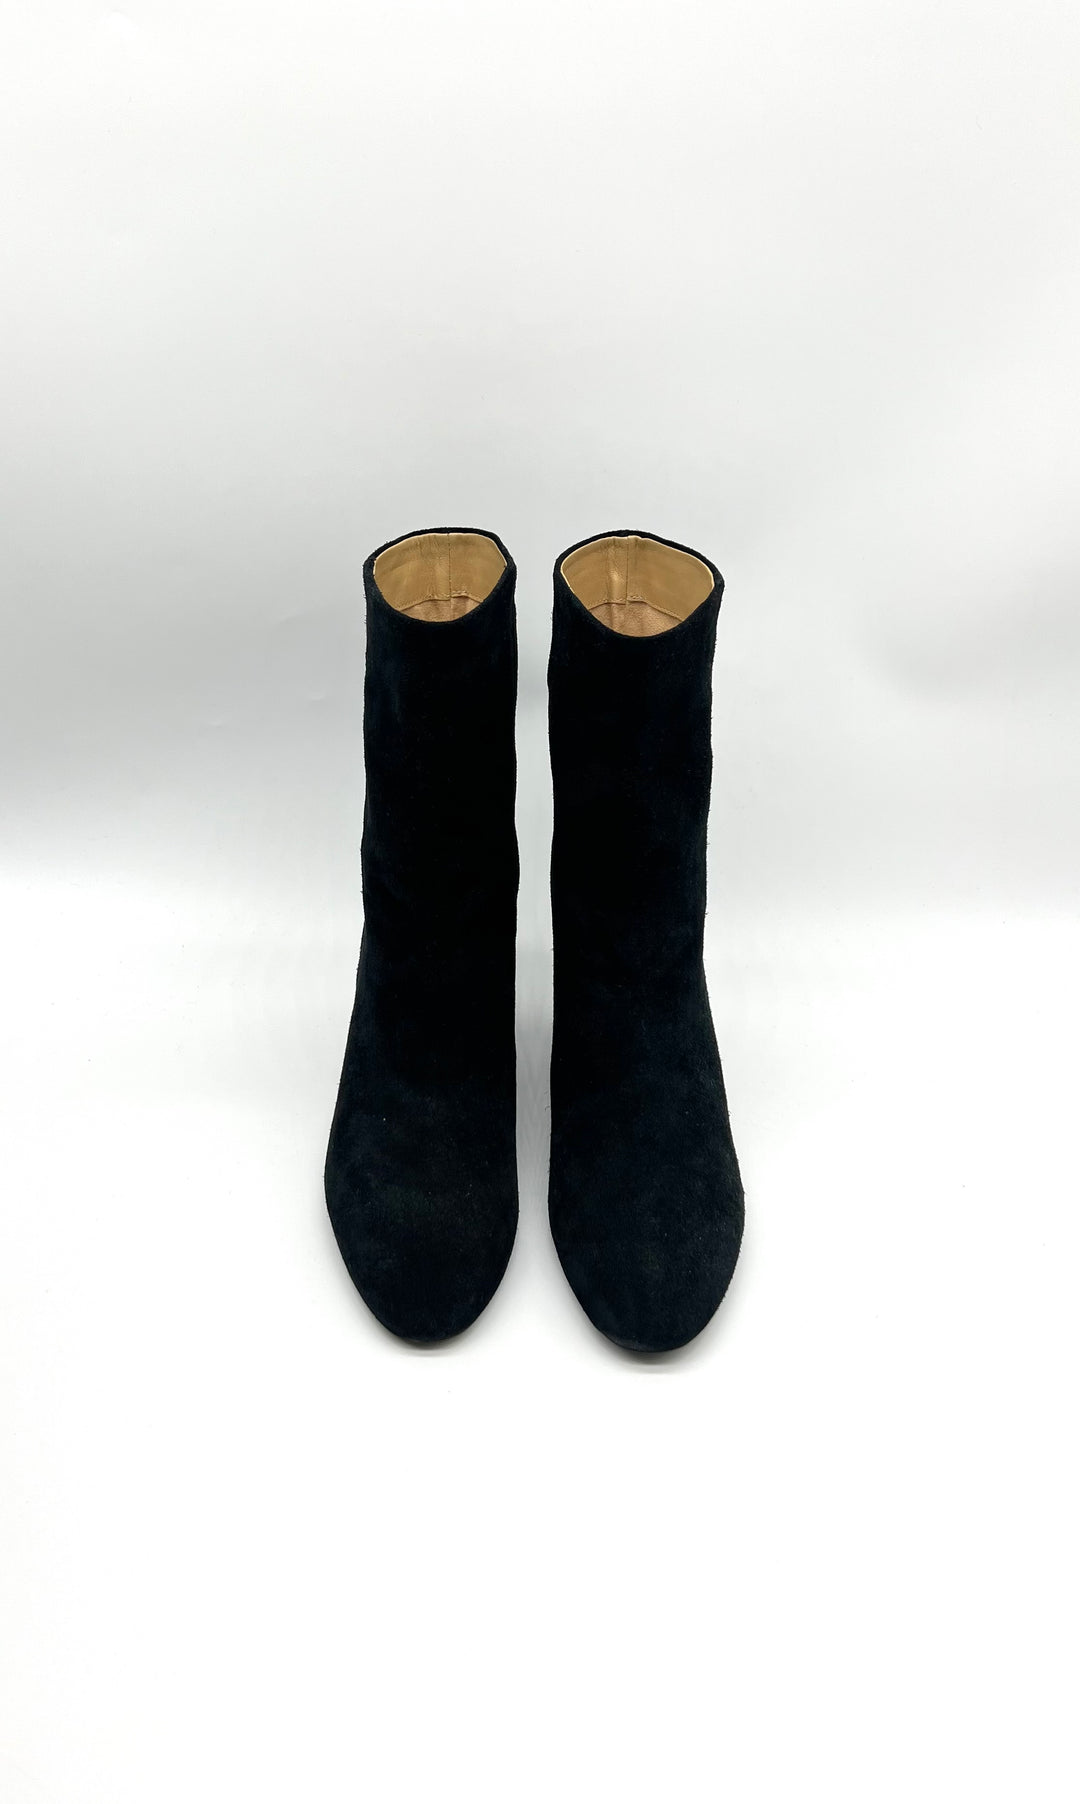 POLO Boots Black Calf Suede Size 37 Low Heel Booties